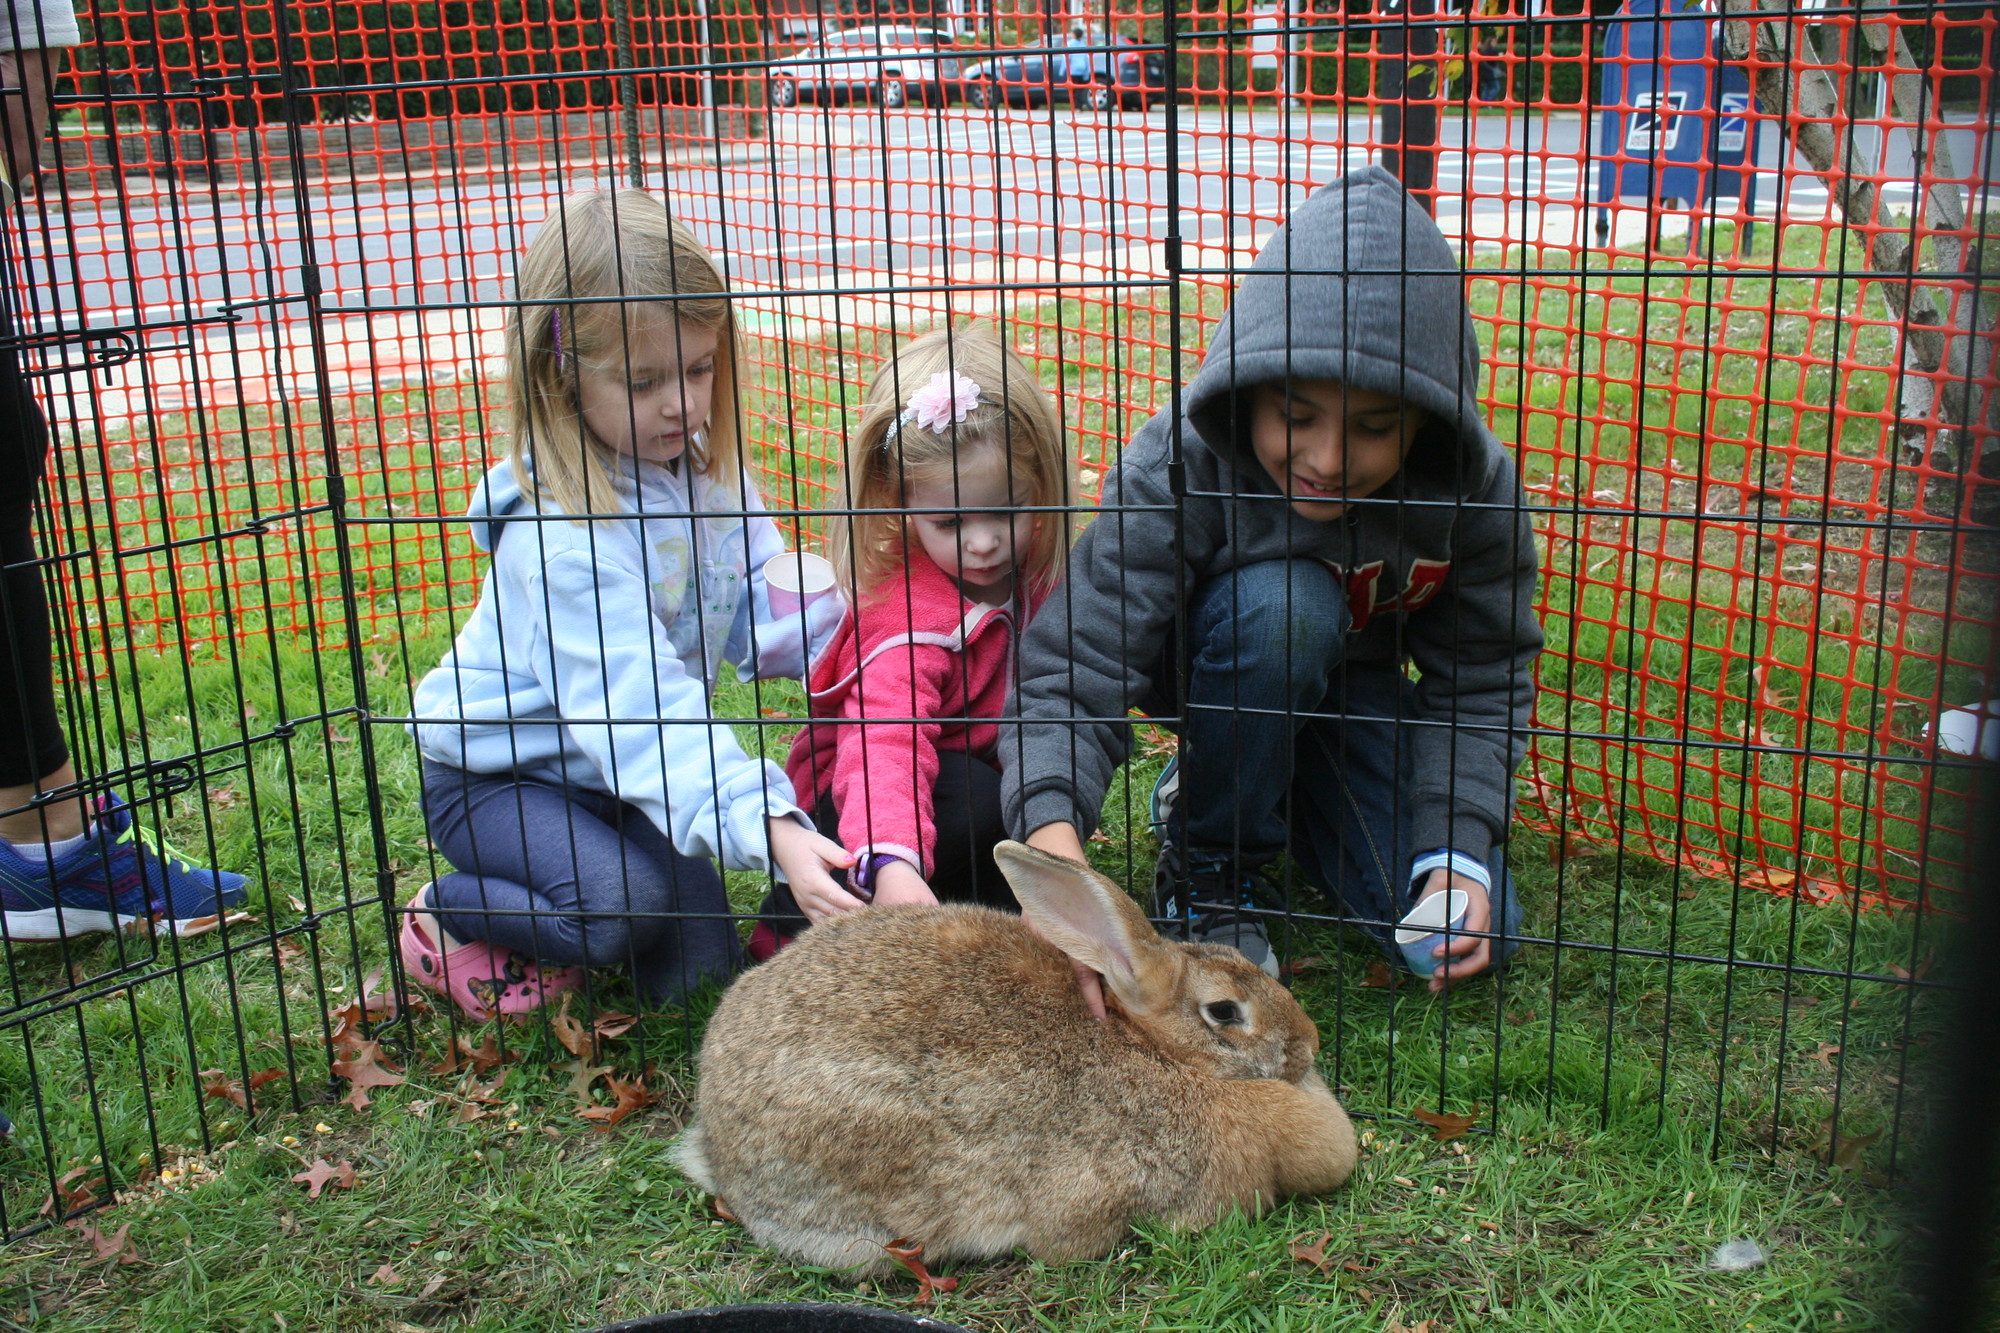 Ellie Baker, Kelsey Baker and Nicolas Albarano pet a very big bunny at the petting zoo.